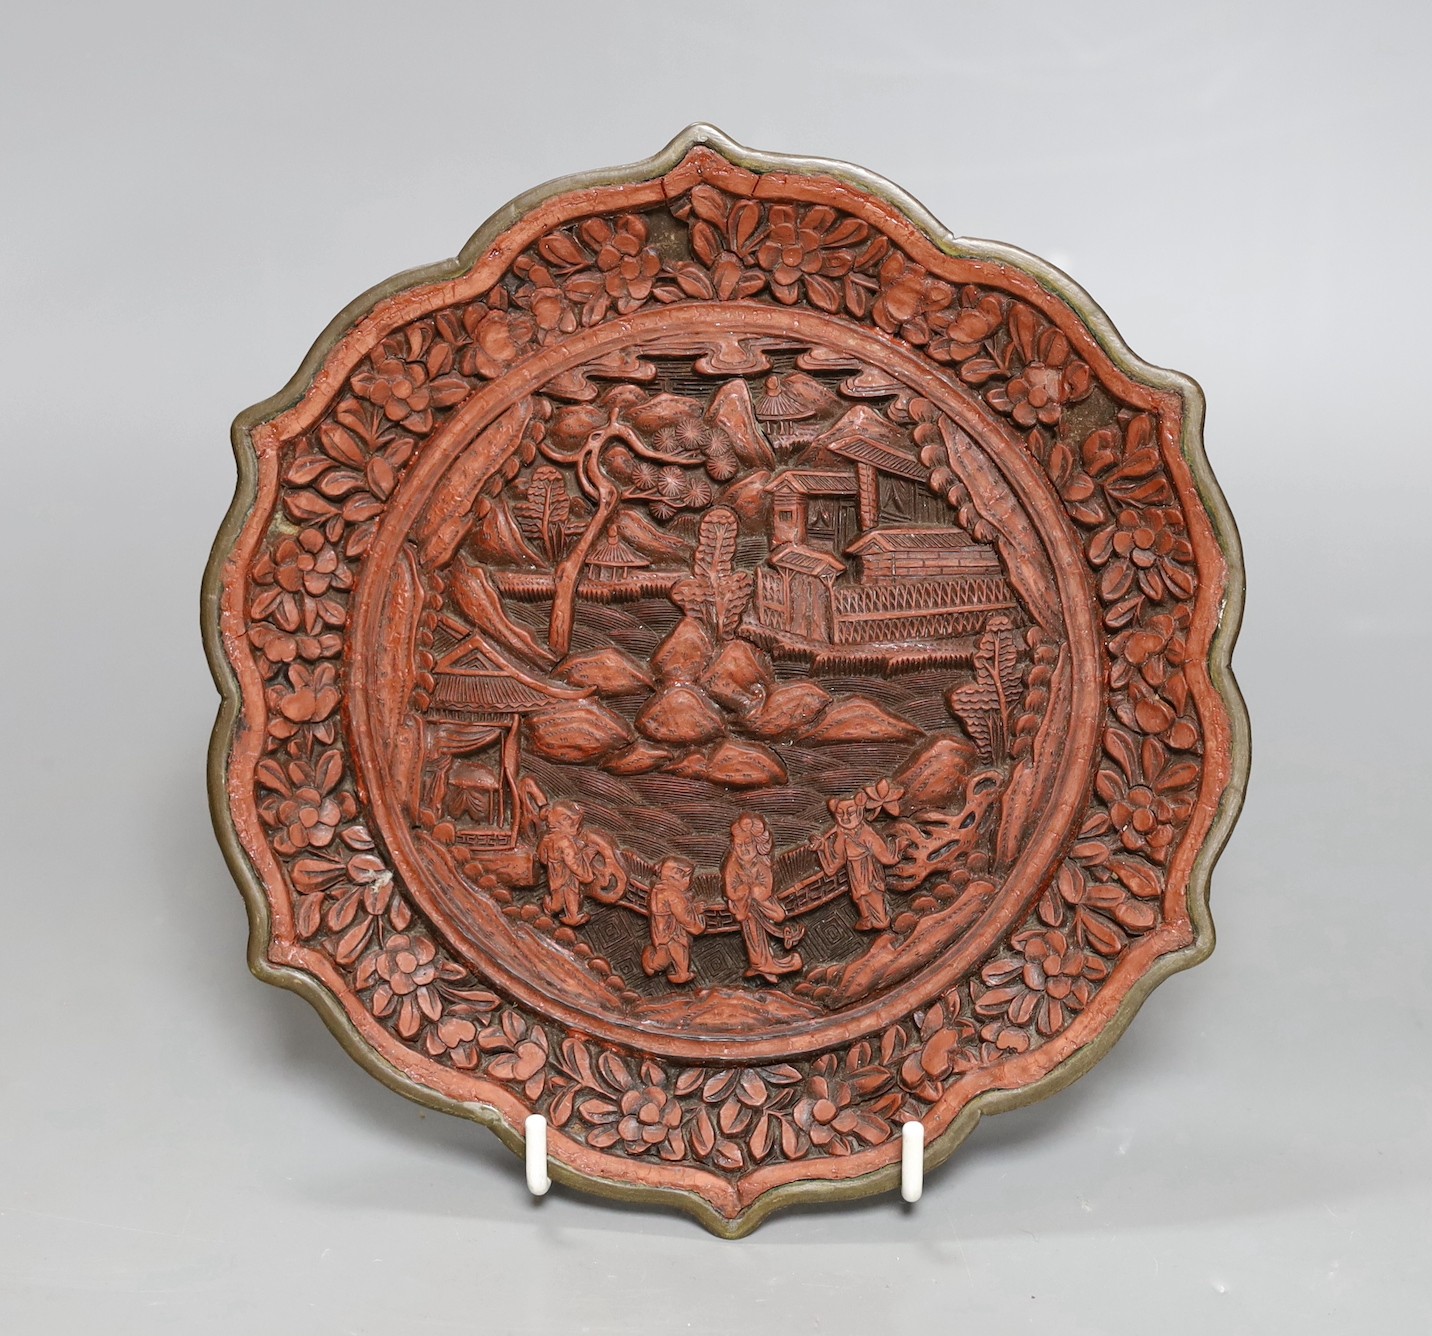 A Chinese cinnabar lacquer dish, early 20th century, 20.5cm diameter